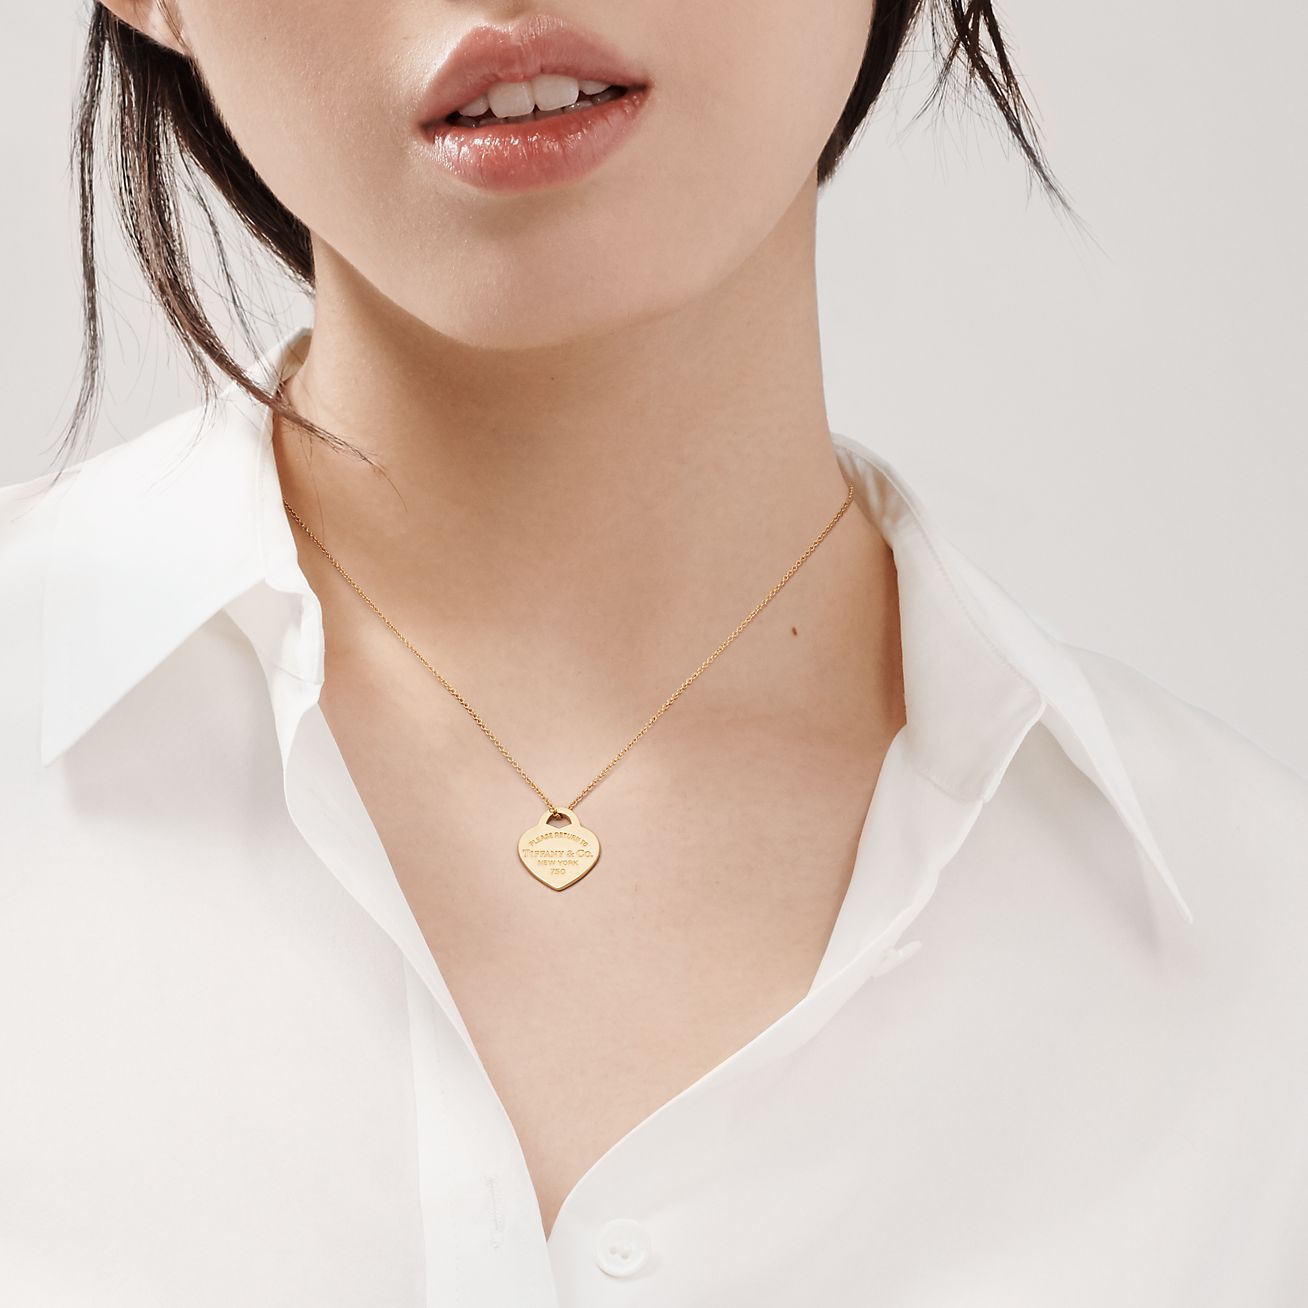 Return To Tiffany® Gold Necklaces & Pendants